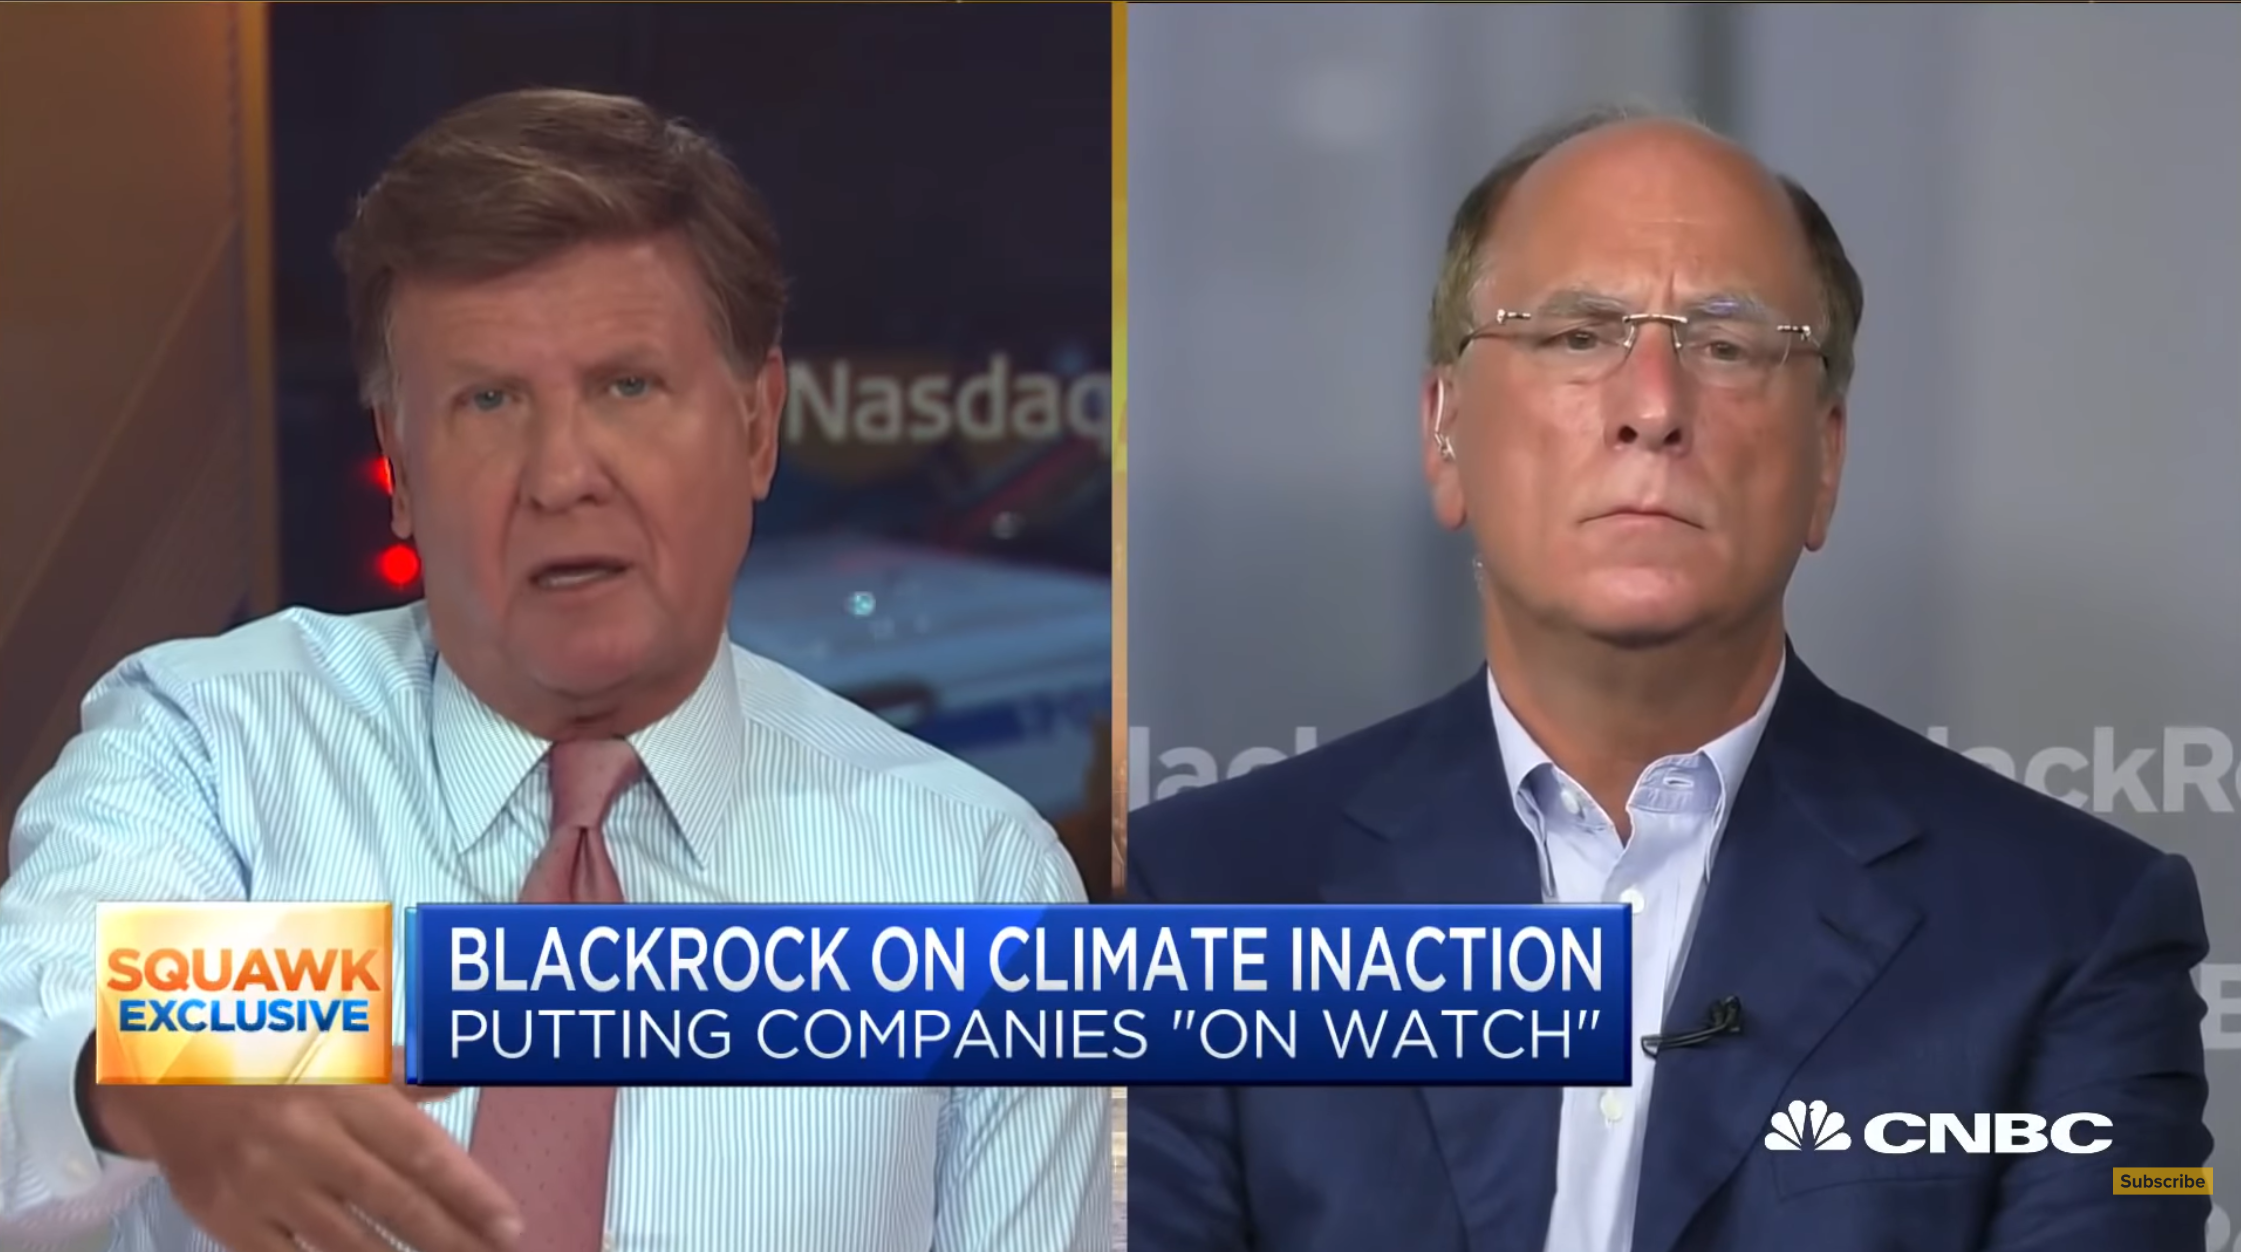 BlackRock Chairman and CEO Larry Fink 